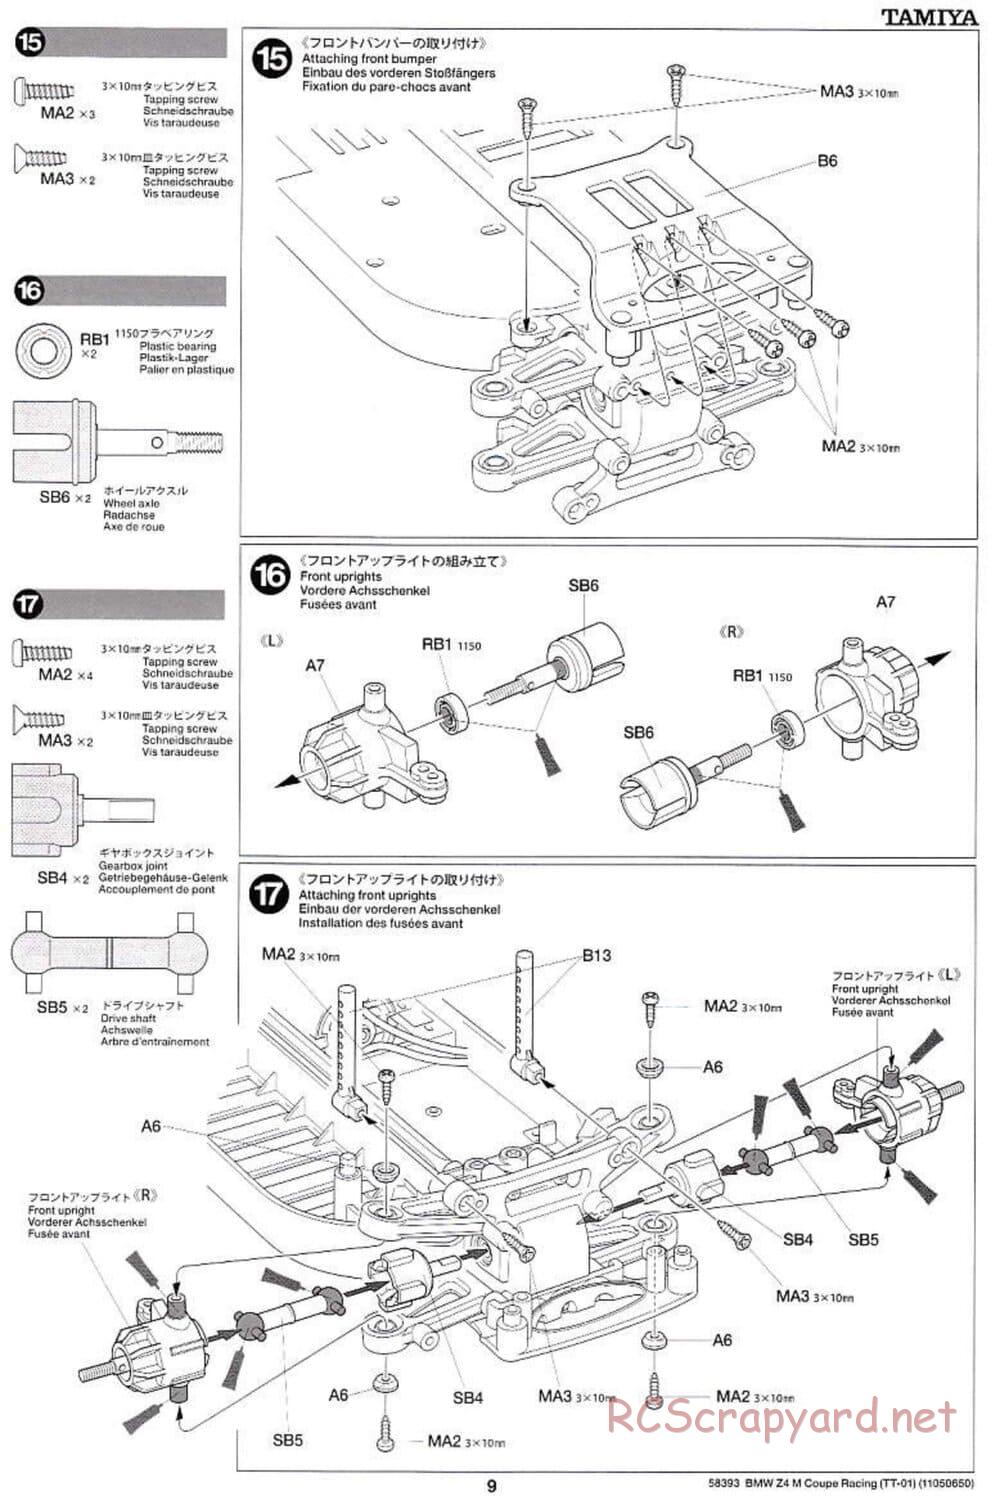 Tamiya - BMW Z4 M Coupe Racing - TT-01 Chassis - Manual - Page 9